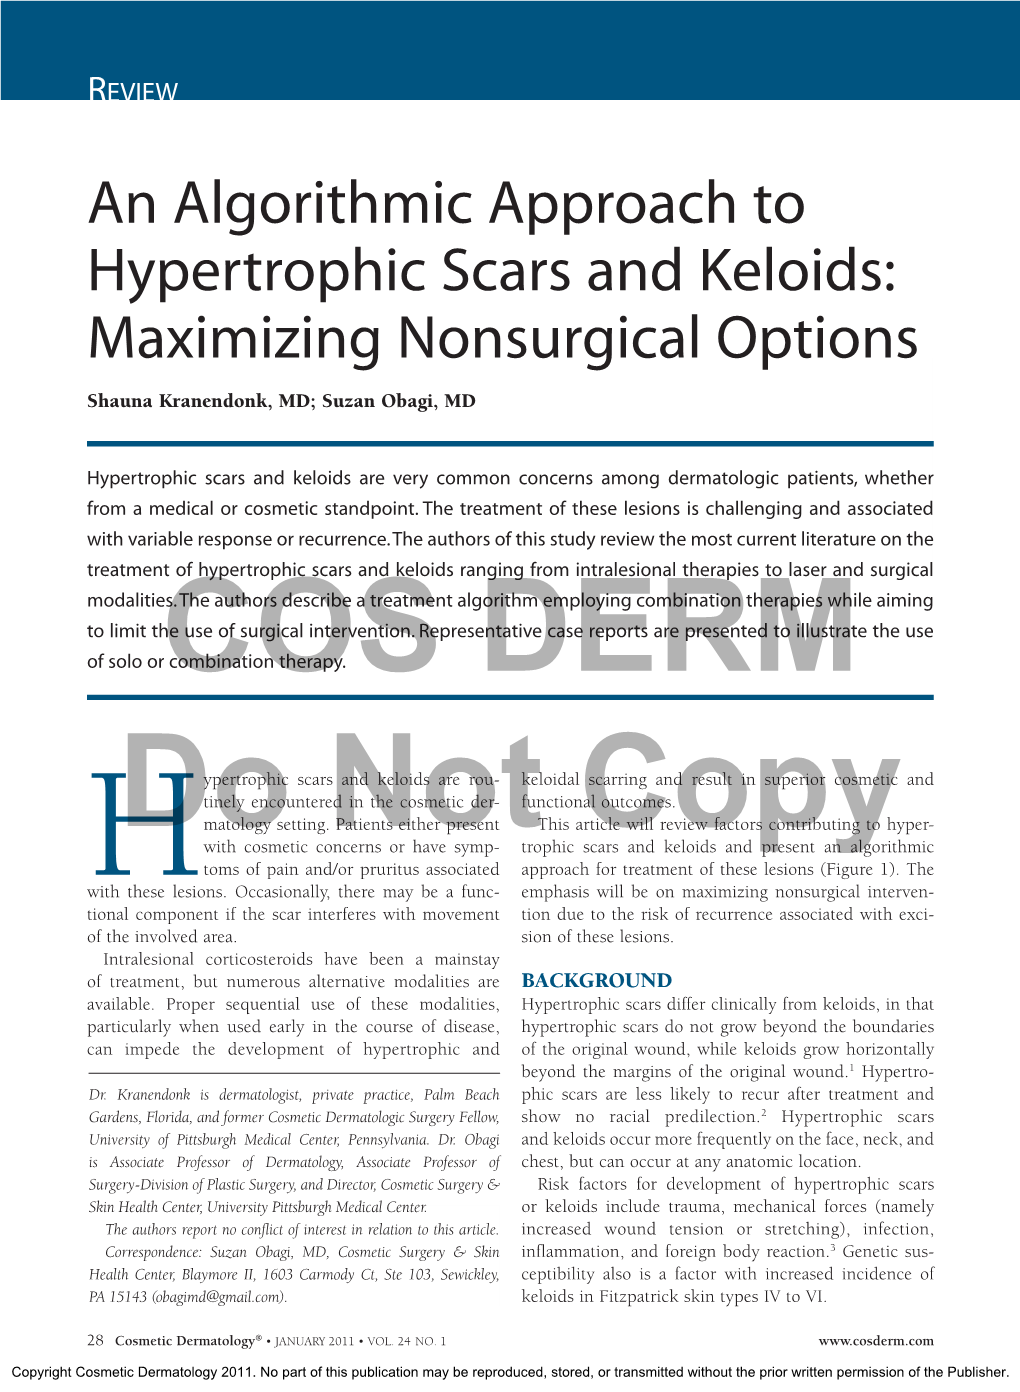 An Algorithmic Approach to Hypertrophic Scars and Keloids: Maximizing Nonsurgical Options